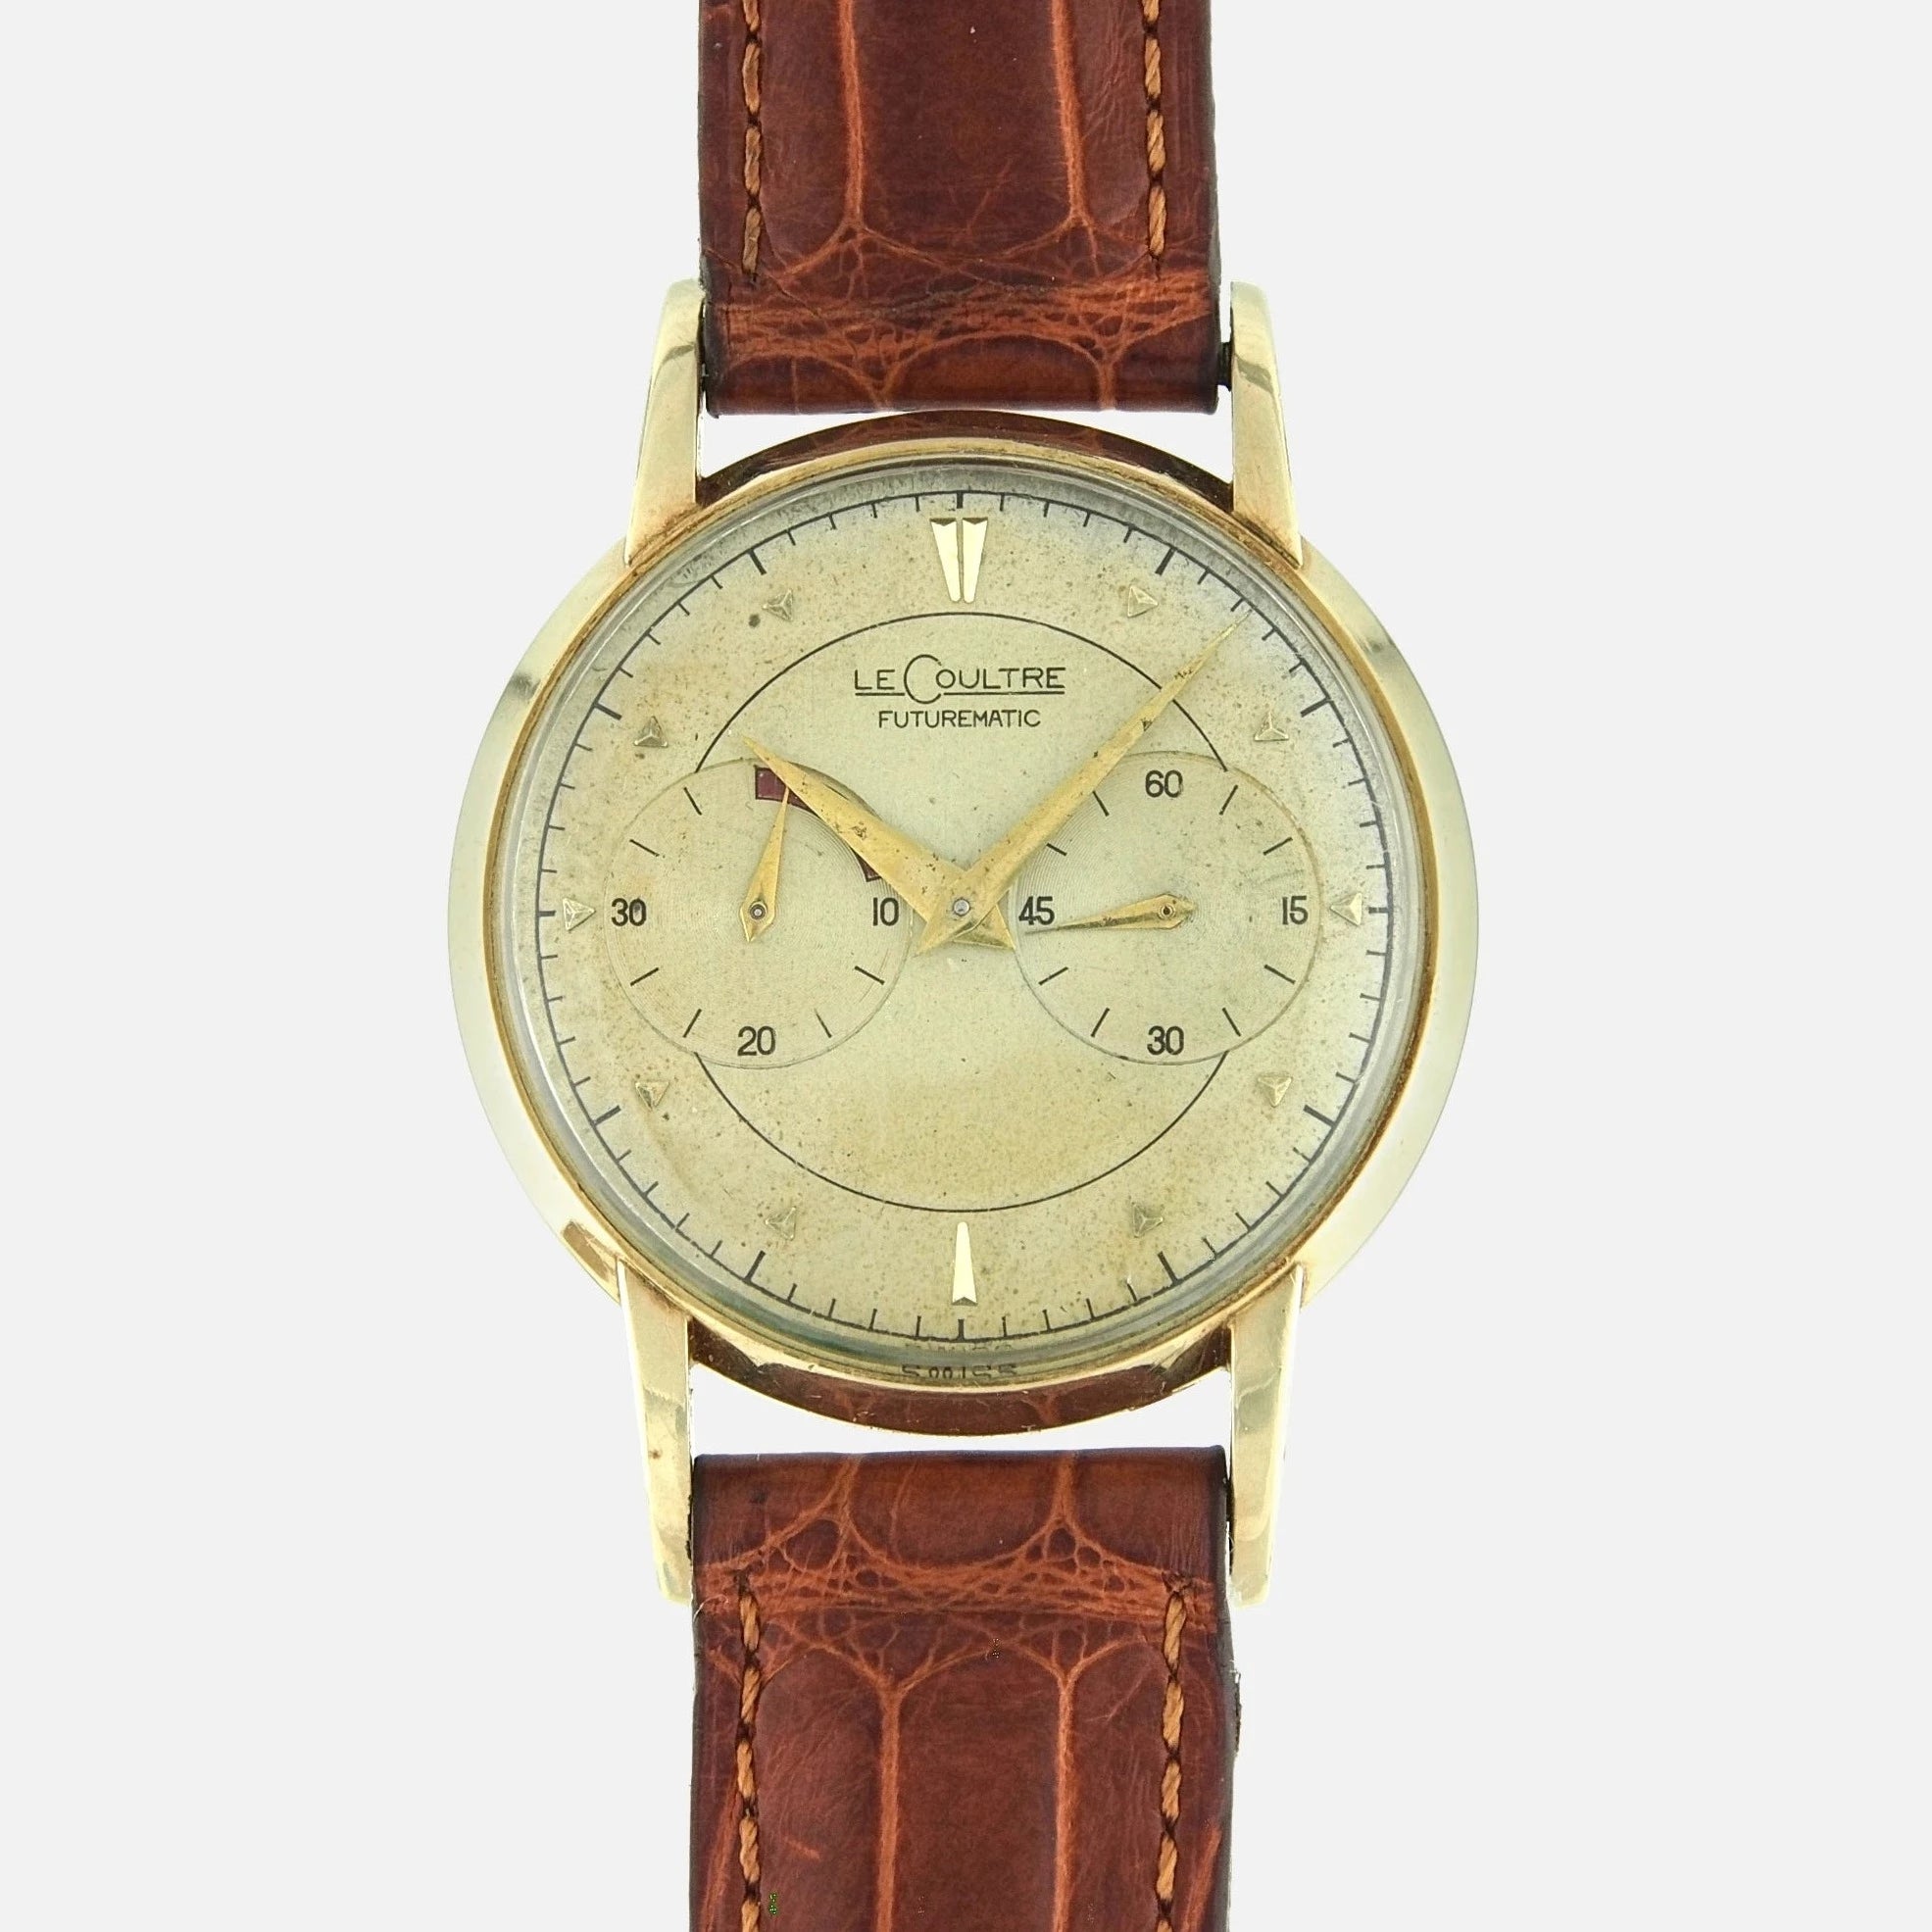 1950s LeCoultre Vintage Futurematic in 10Kt Gold-Filled Yellow Gold the first watch bumper automatic winding 497 calibre and power reserve available for shipping on Vintage Watch Leader